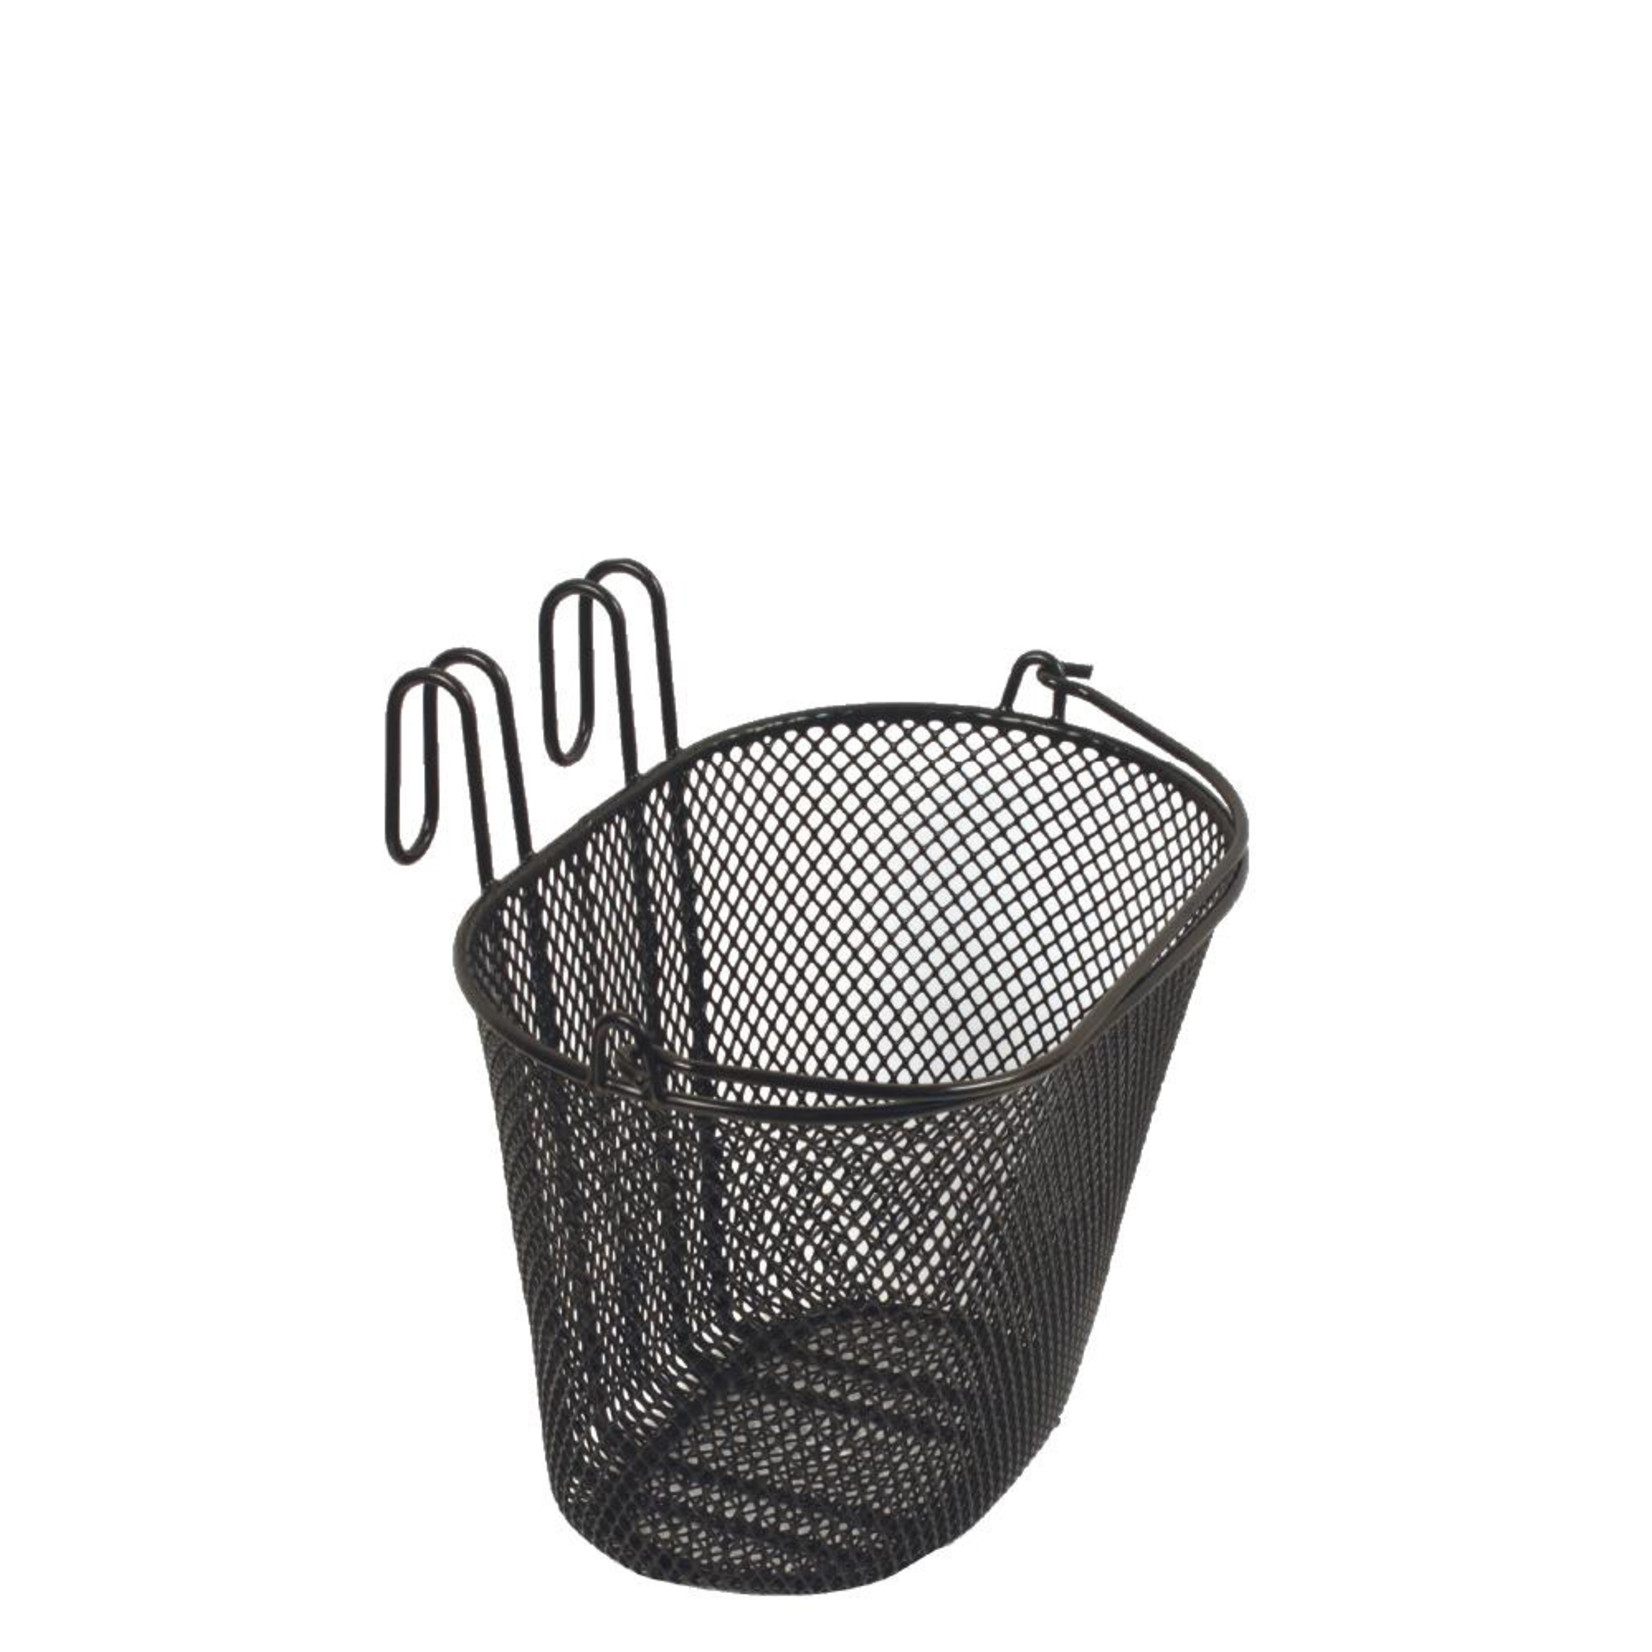 Bikecorp BC Bike/Cycling Basket - Small Wire Front Bike Basket With Handle - Black